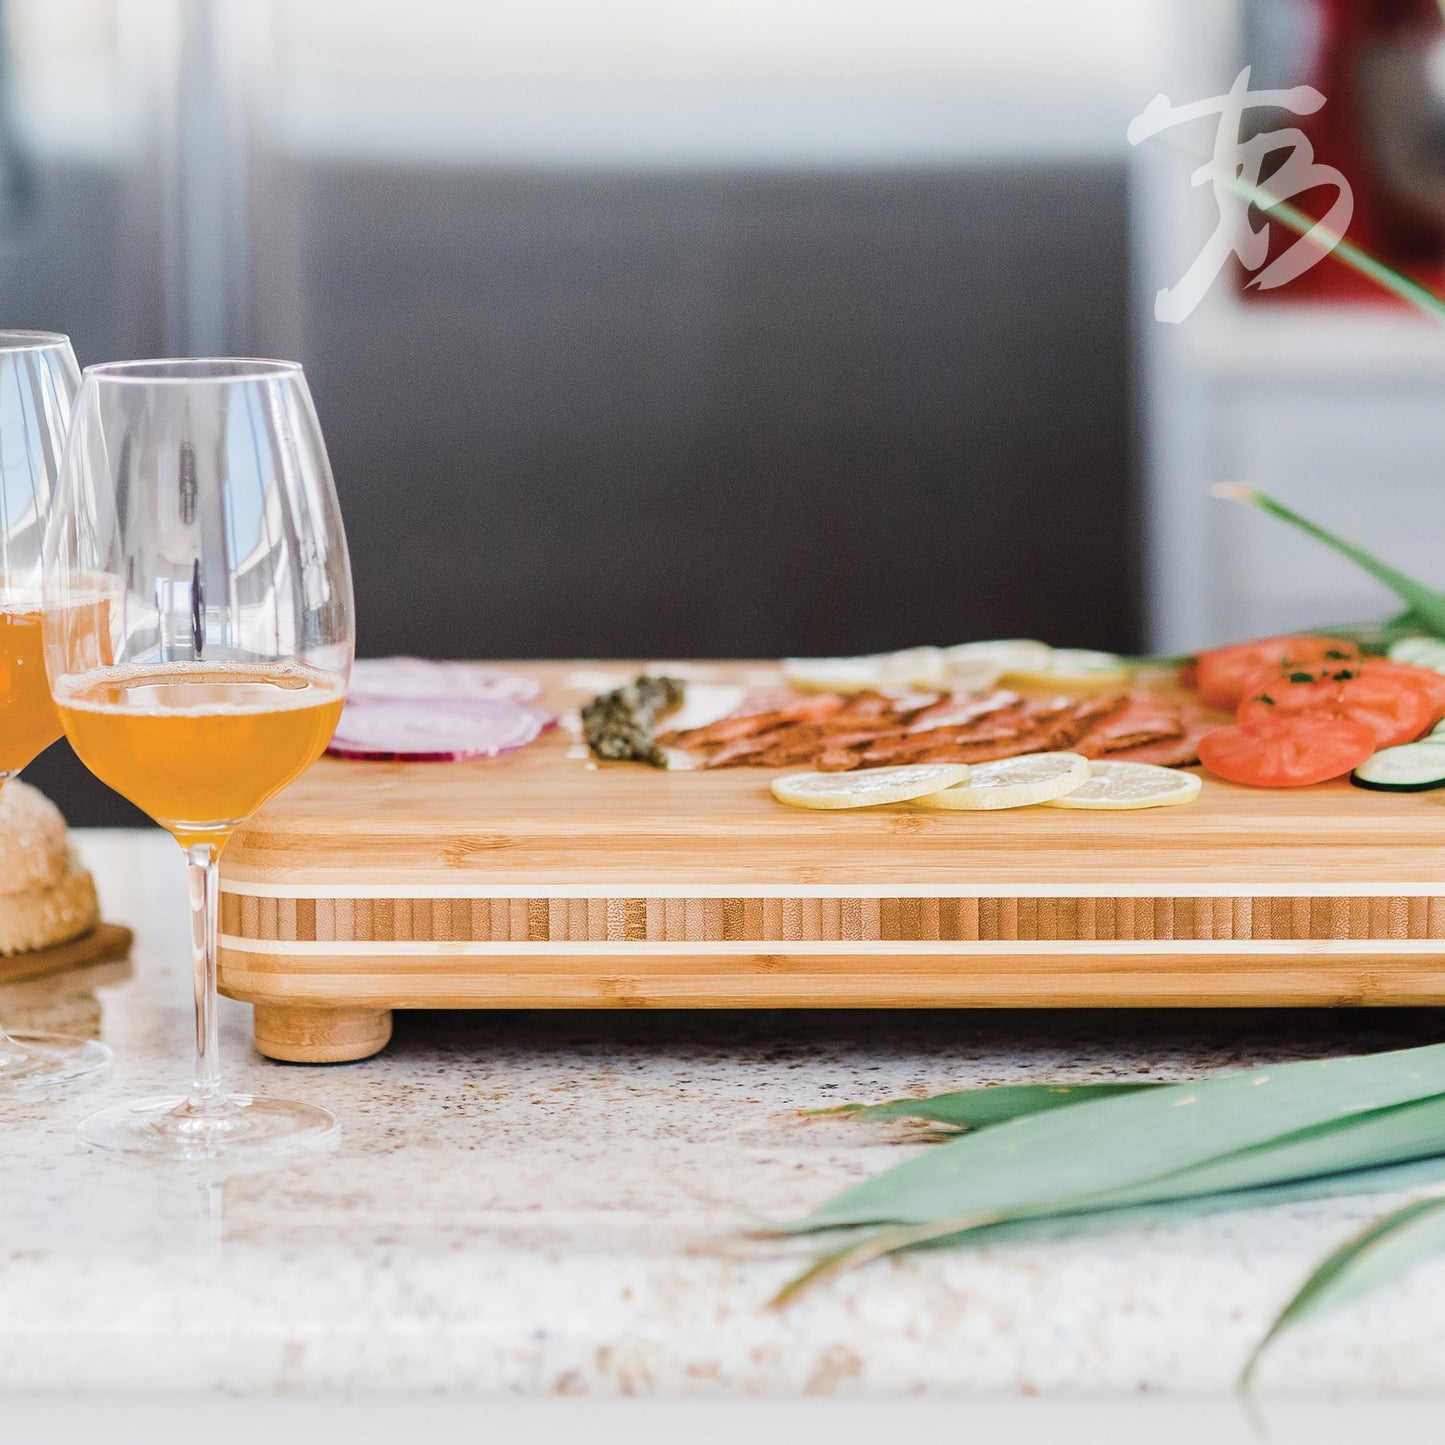 footed board on countertop arranged with appetizers and wine glasses set to the side.